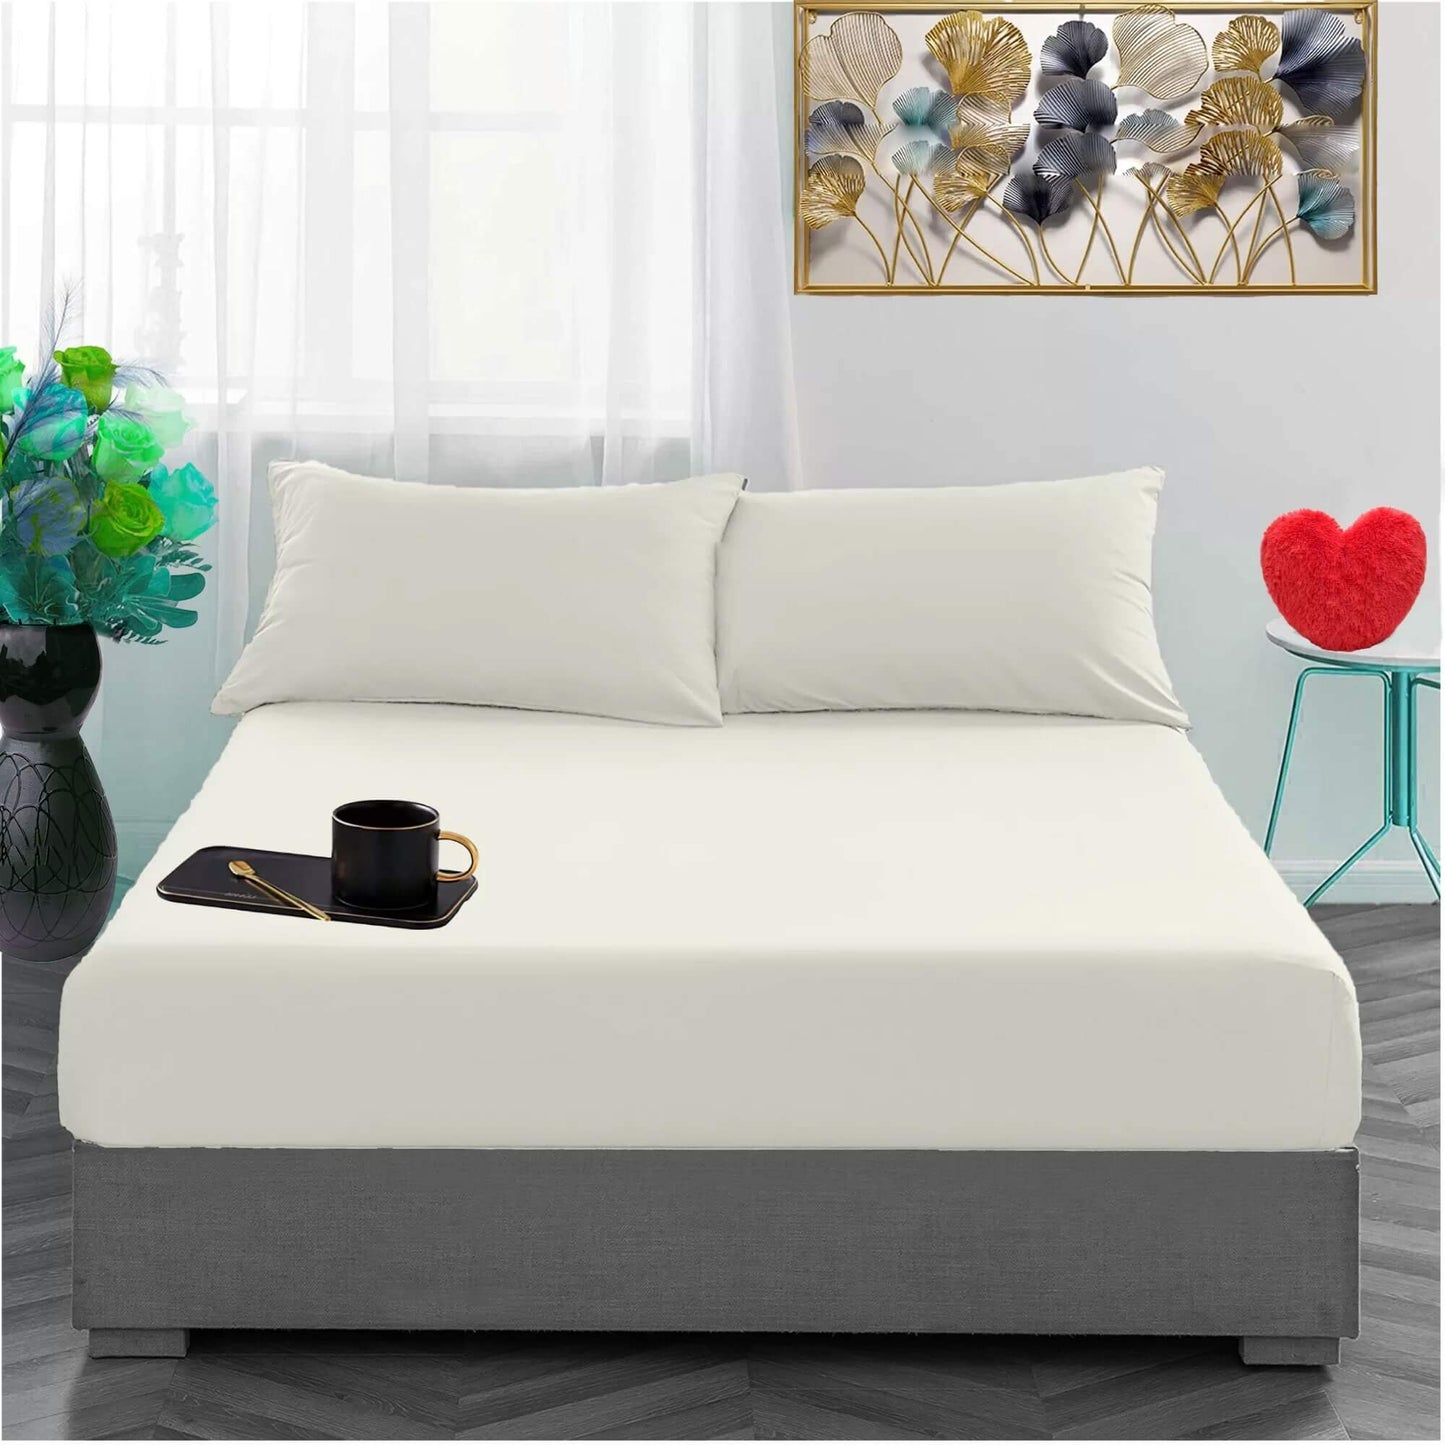 Small Double Fitted Sheet 100% Brushed Cotton Bed Sheet - TheComfortshop.co.ukBed Sheets0721718977315thecomfortshopTheComfortshop.co.ukFlannelette FIT Cream 4FT-1Cream4FT Small DoubleSmall Double Fitted Sheet 100% Brushed Cotton Bed Sheet - TheComfortshop.co.uk